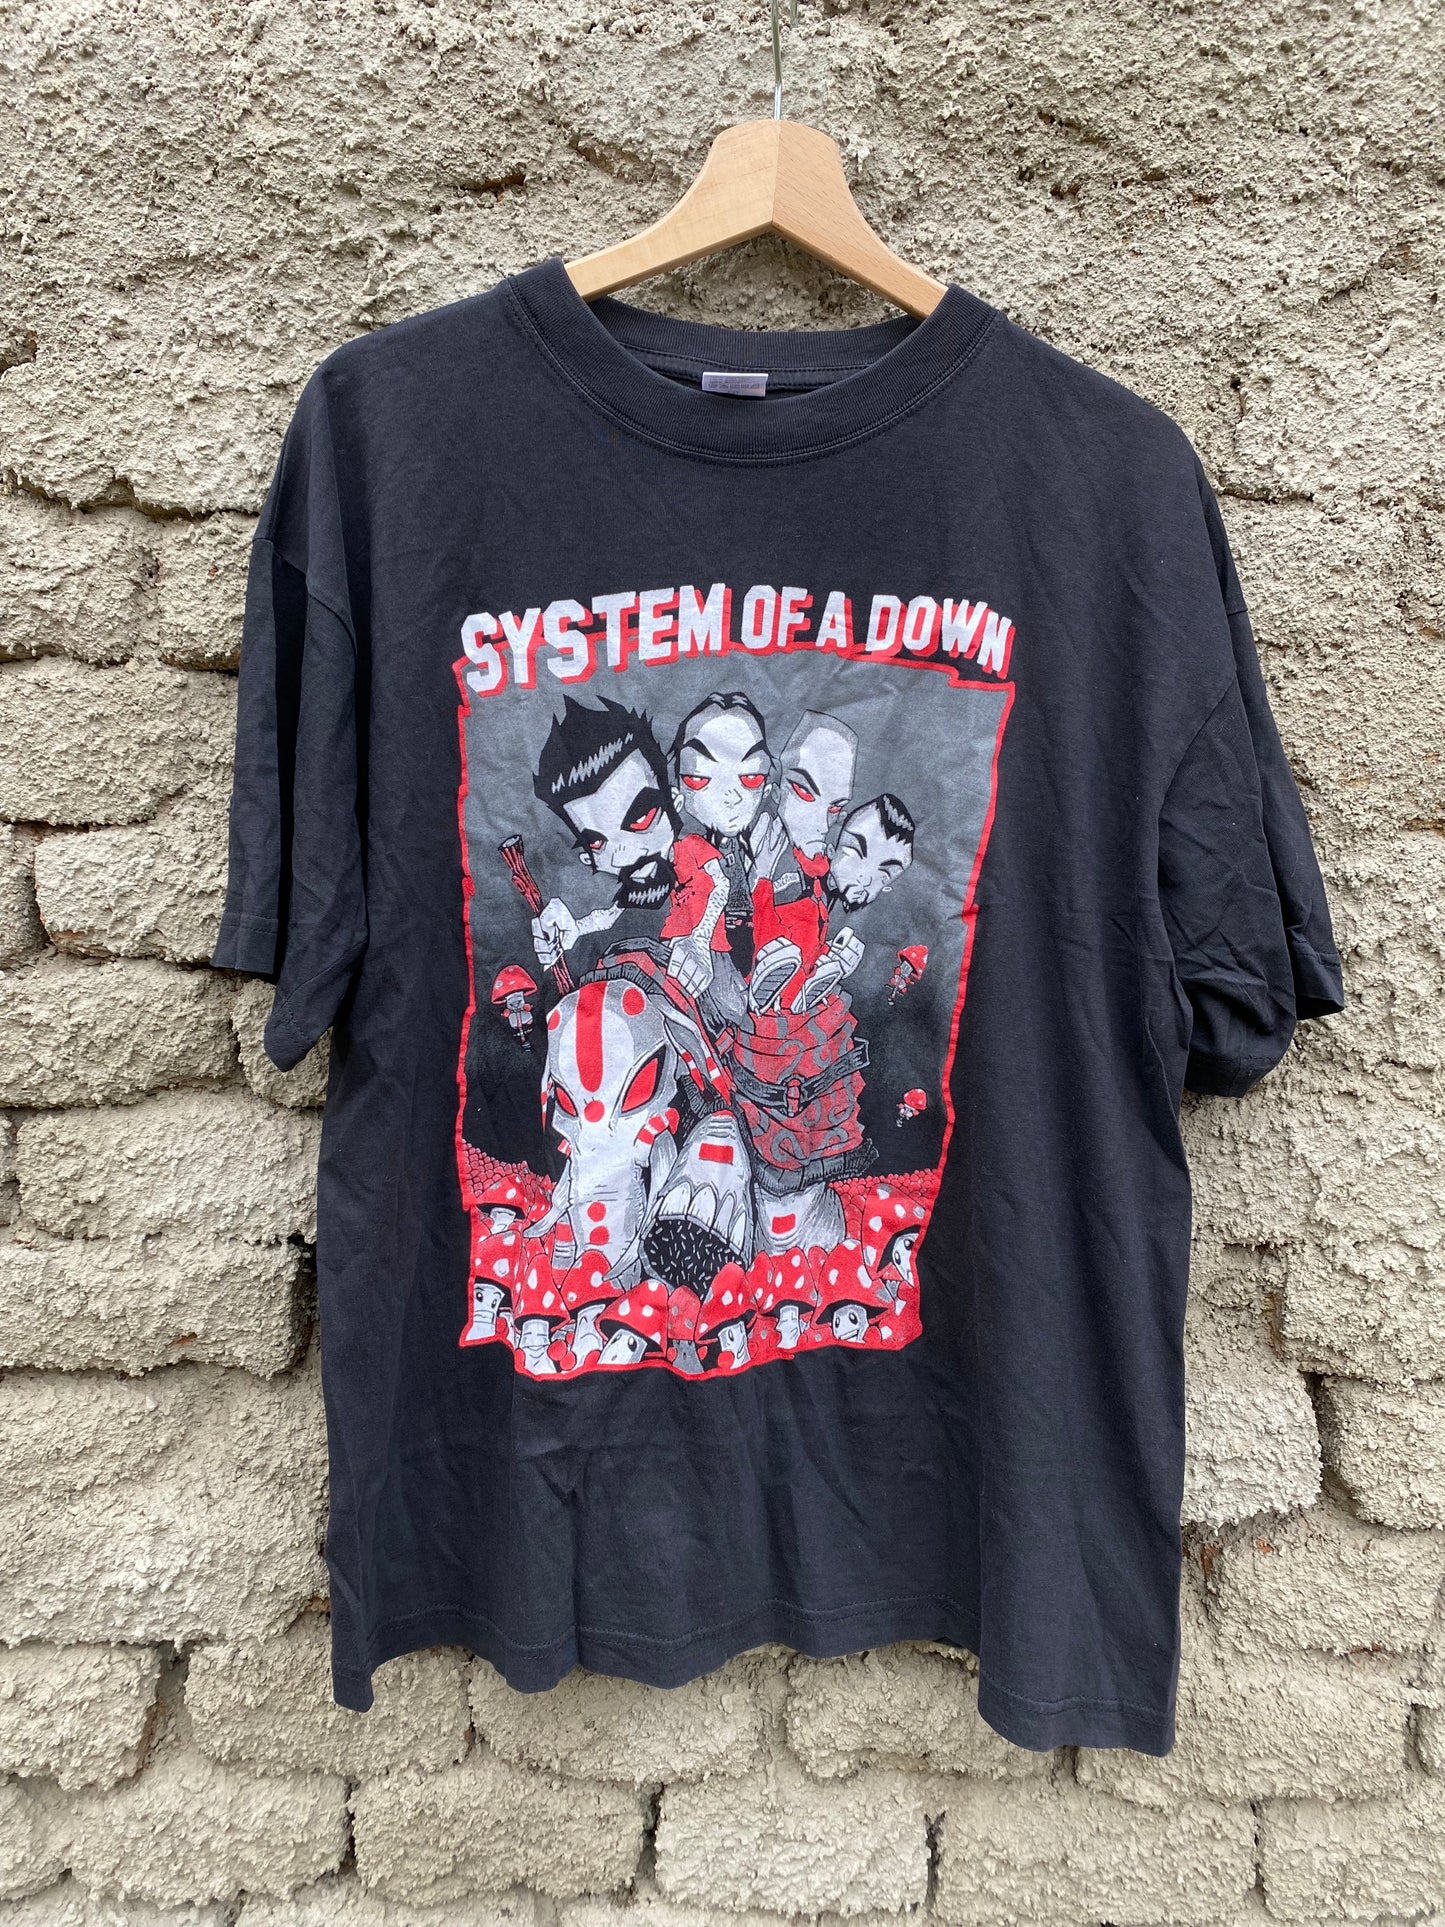 Vintage System of a Down 00s t-shirt - size L